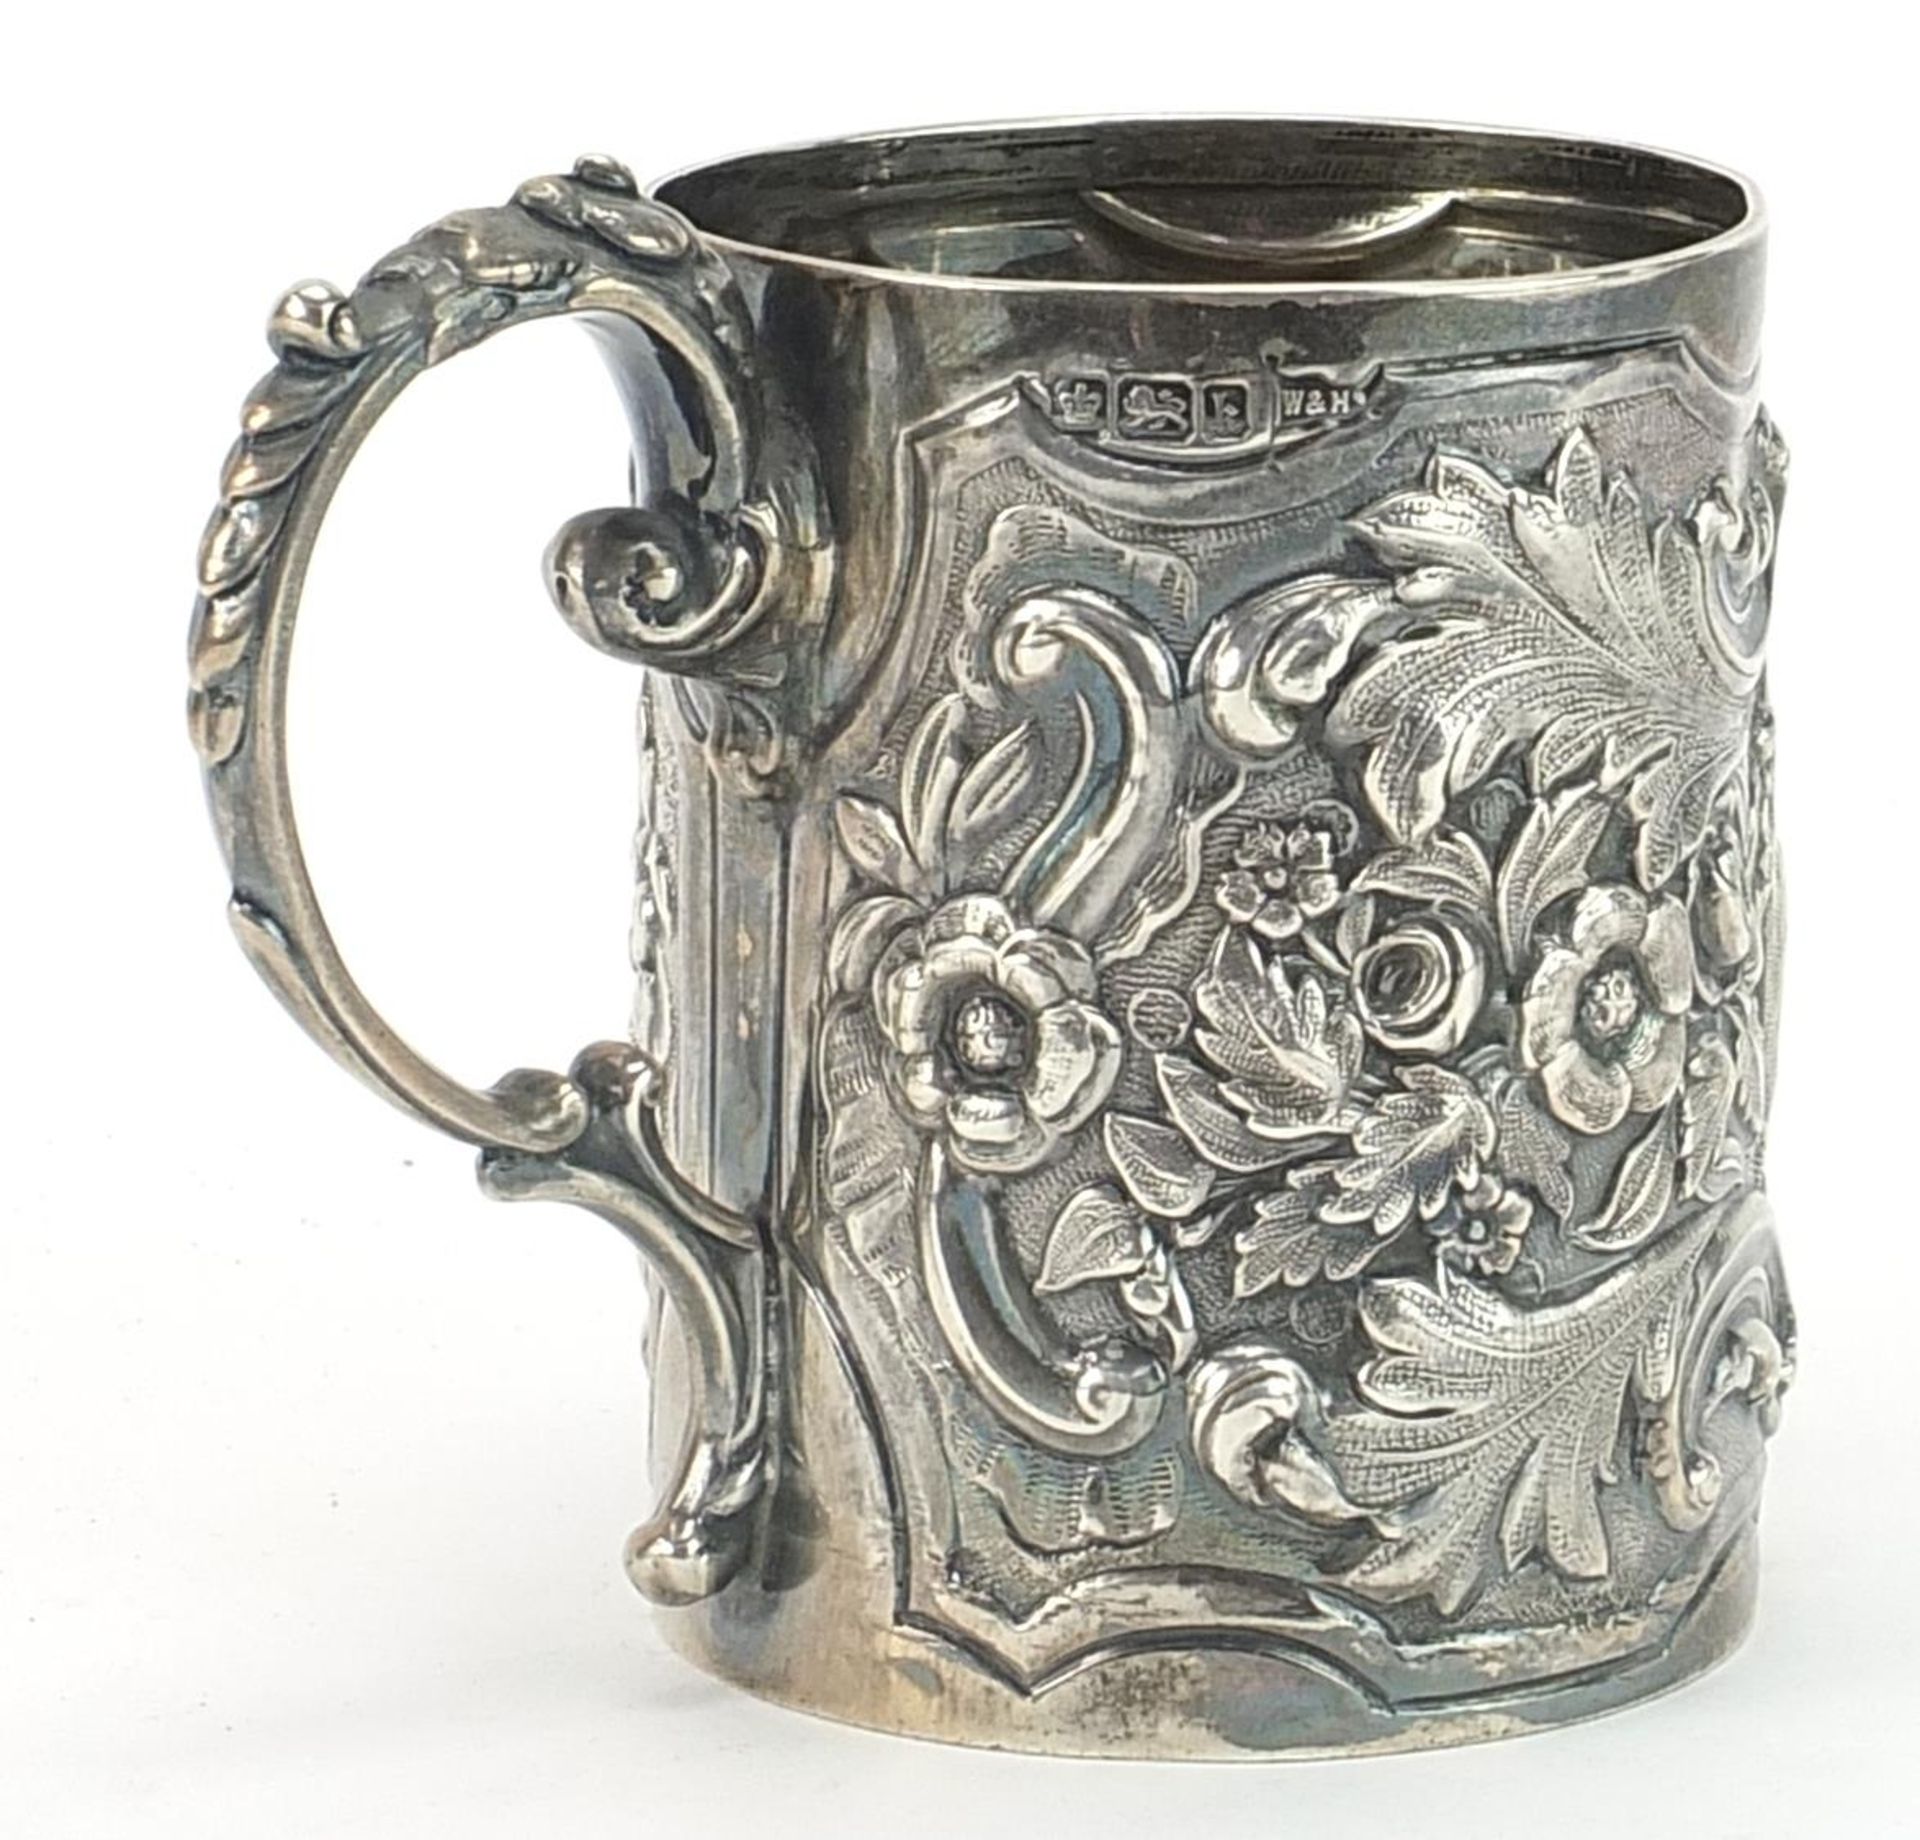 Walker & Hall, Edwardian silver christening tankard profusely embossed with flowers and foliage, - Image 2 of 4